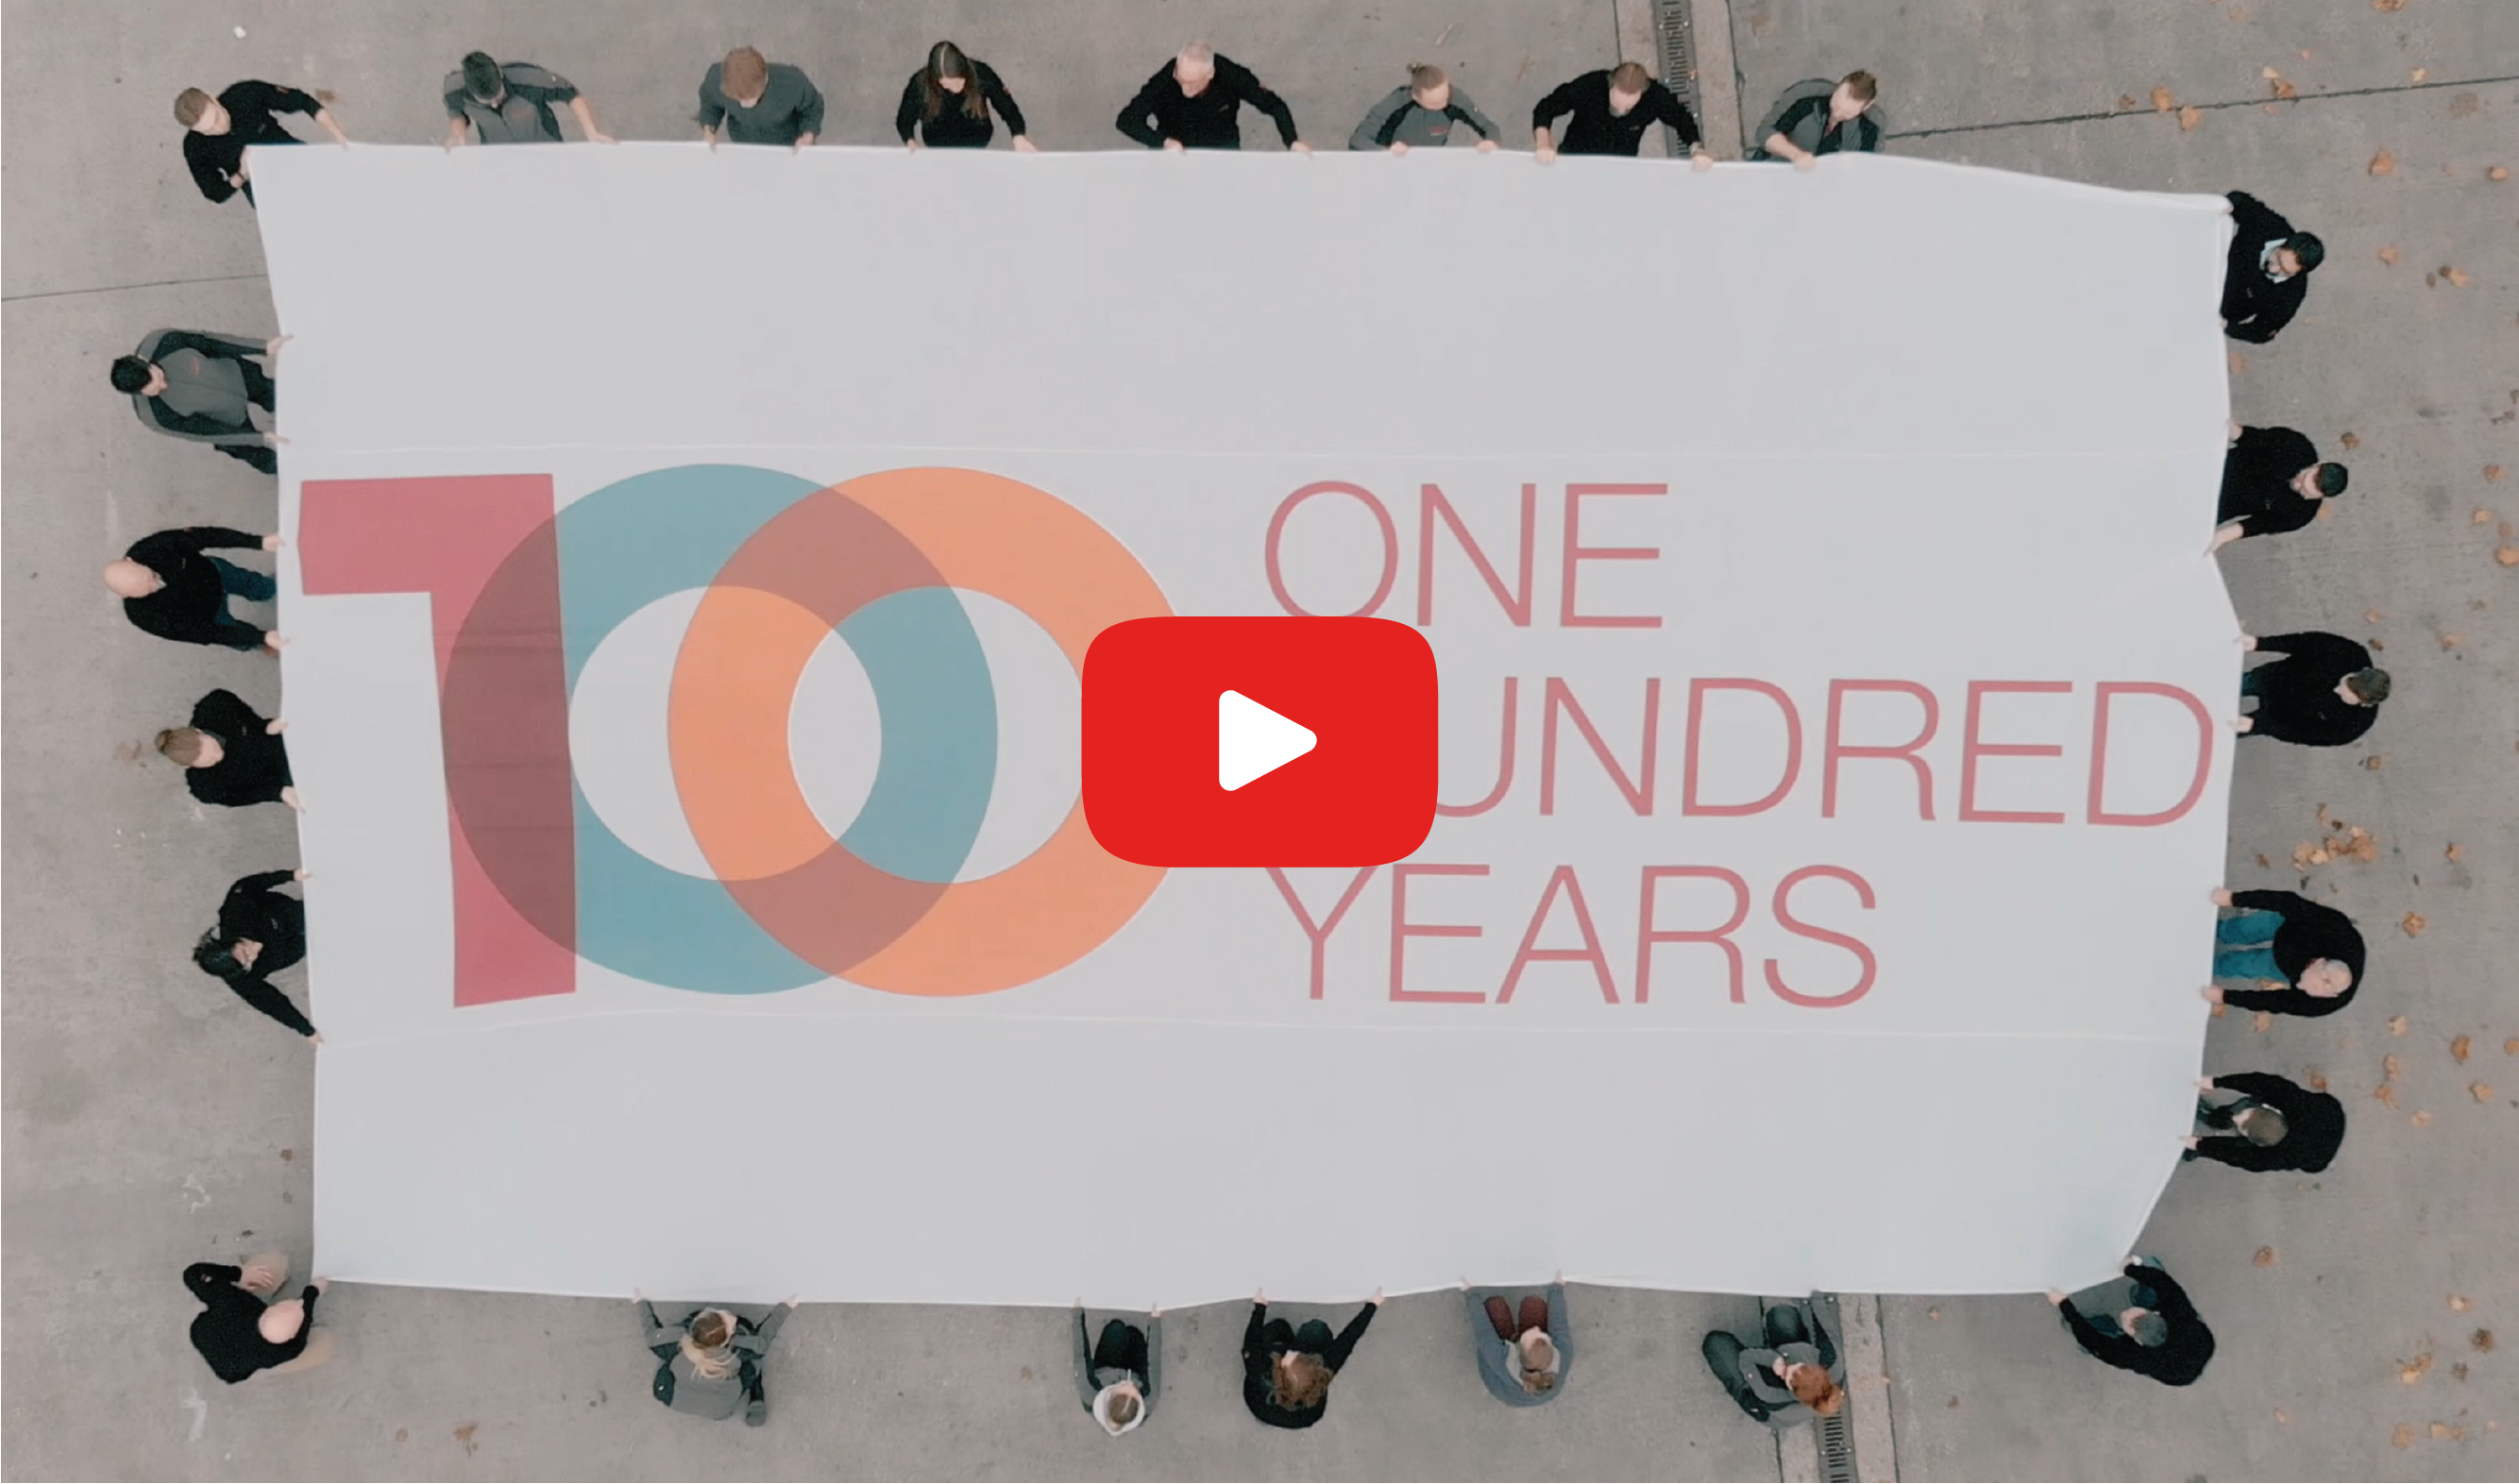 100 Year Banner with play button - 640 x 377.png